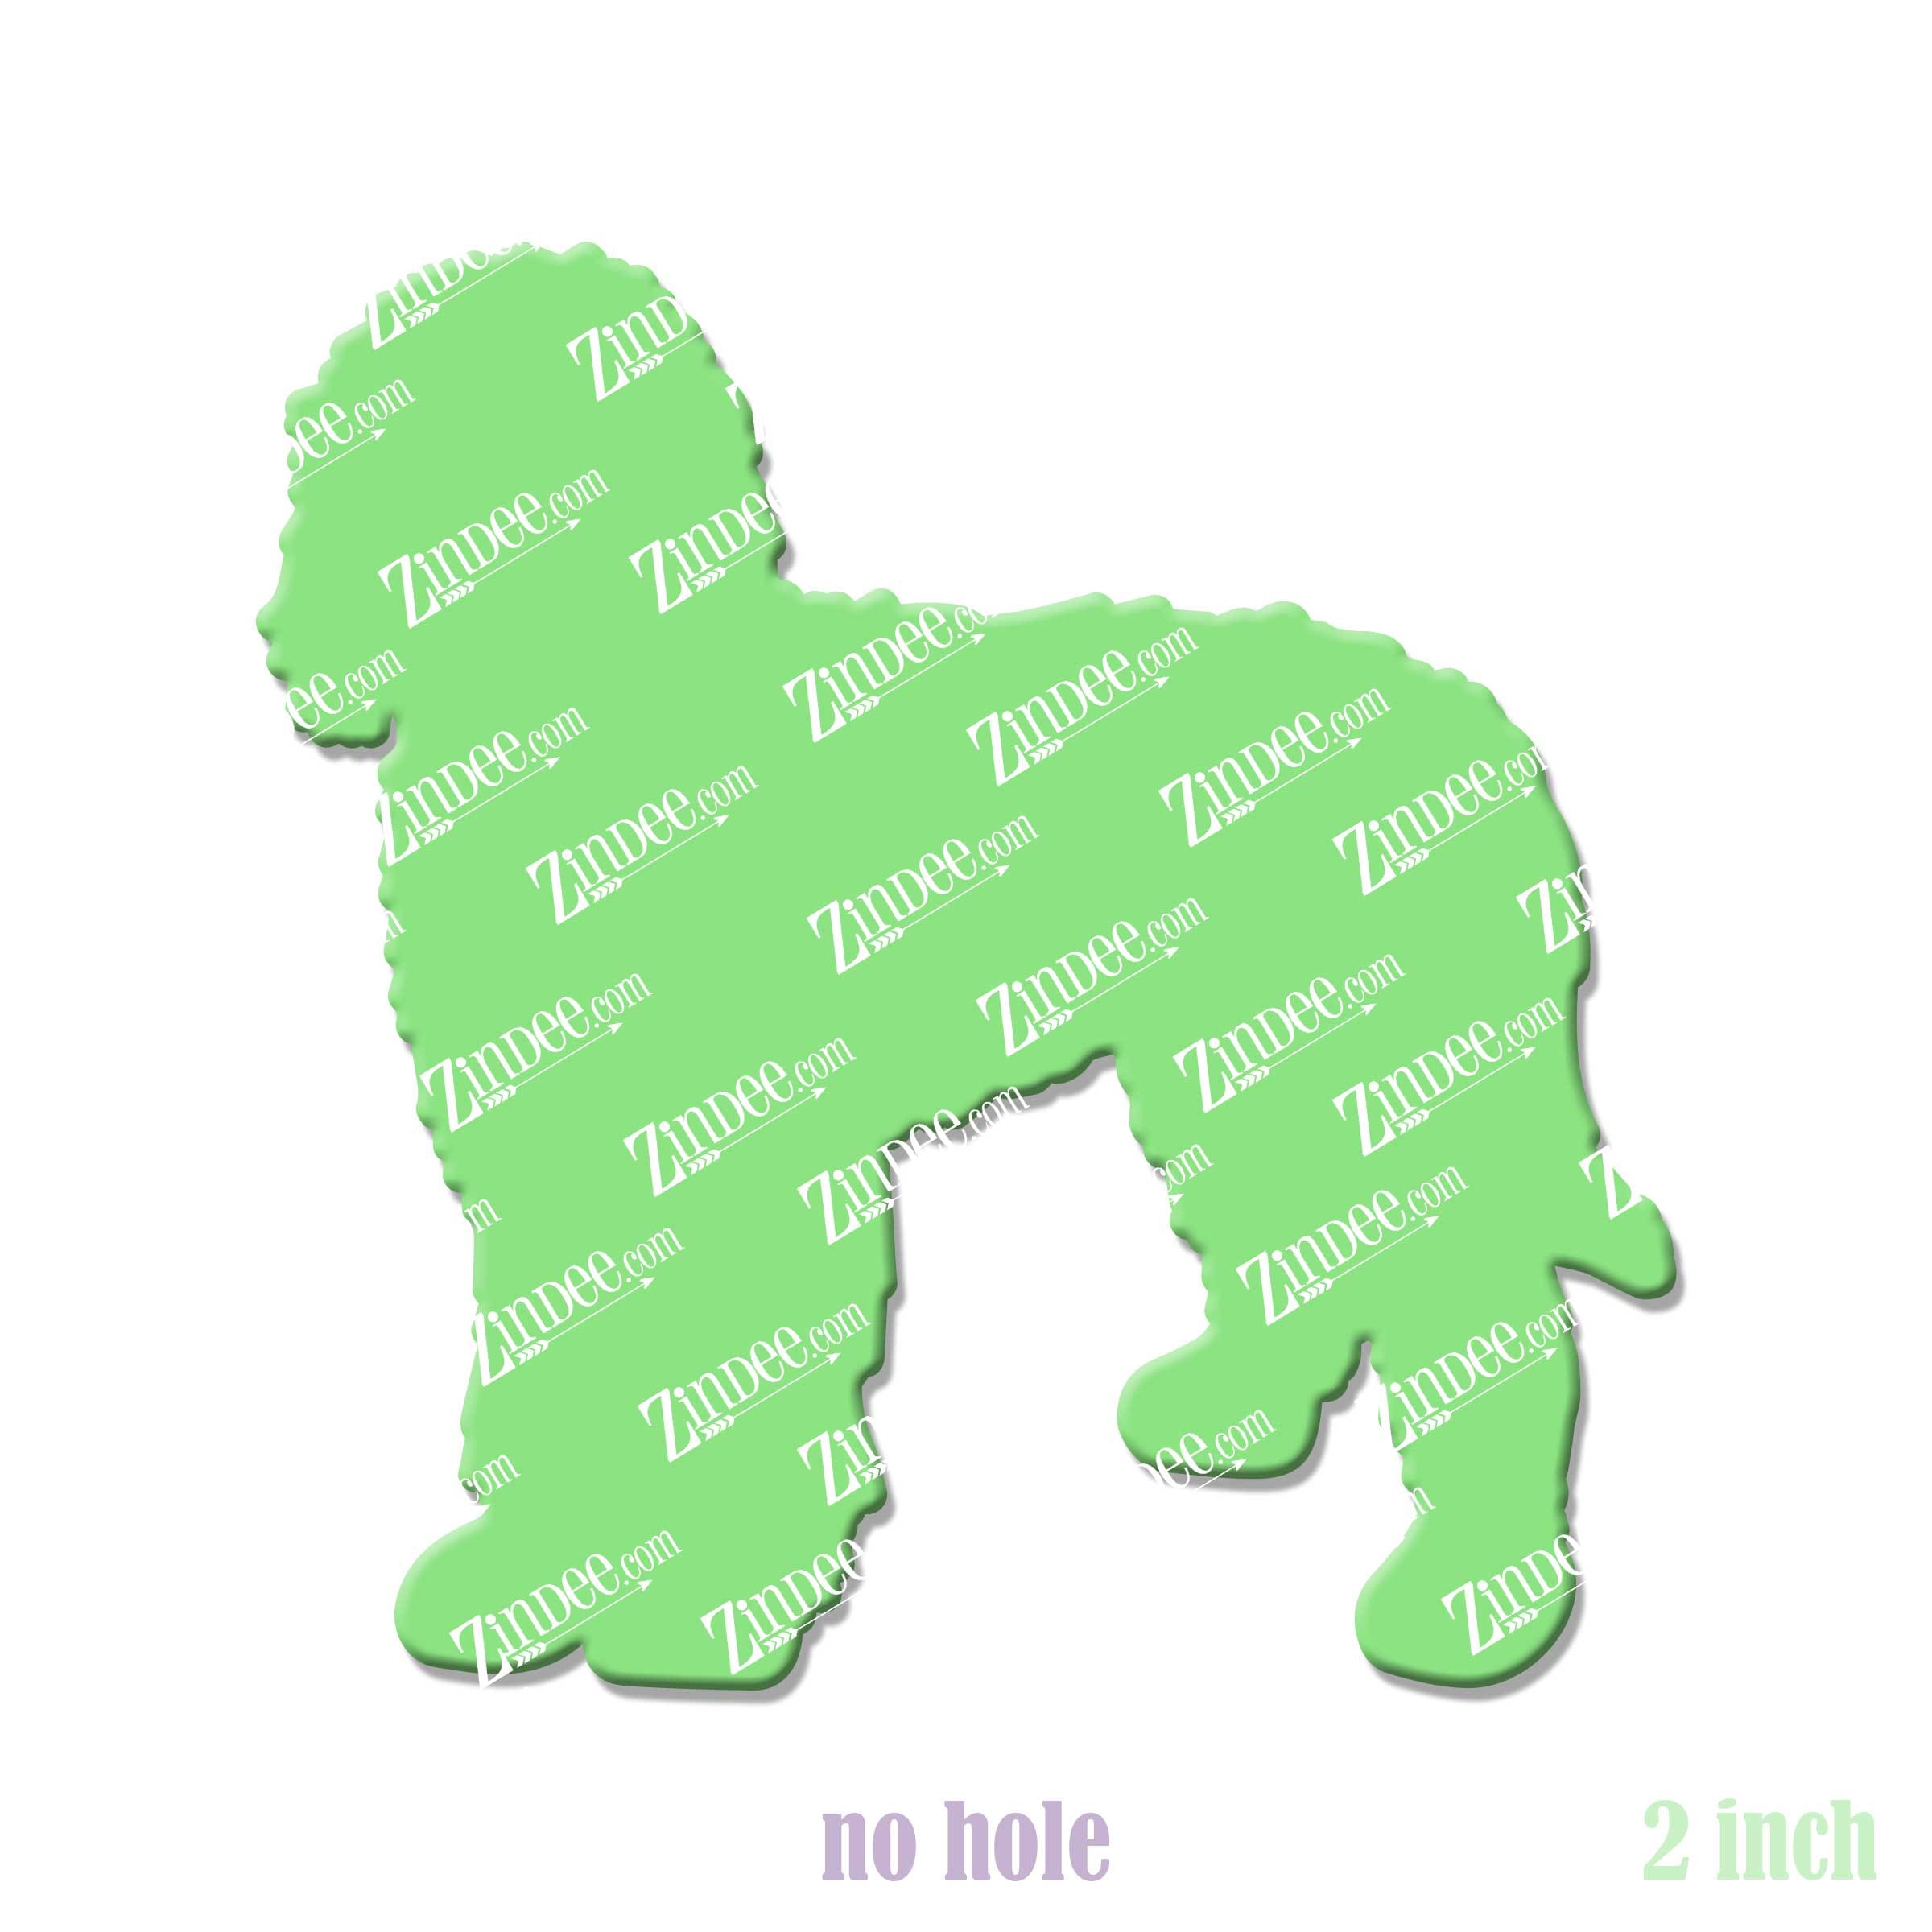 Golden Doodle acrylic blank (2 inch) NO HOLE – Acrylic Blanks, Stickers,  Printed Vinyl, Glitter and more!